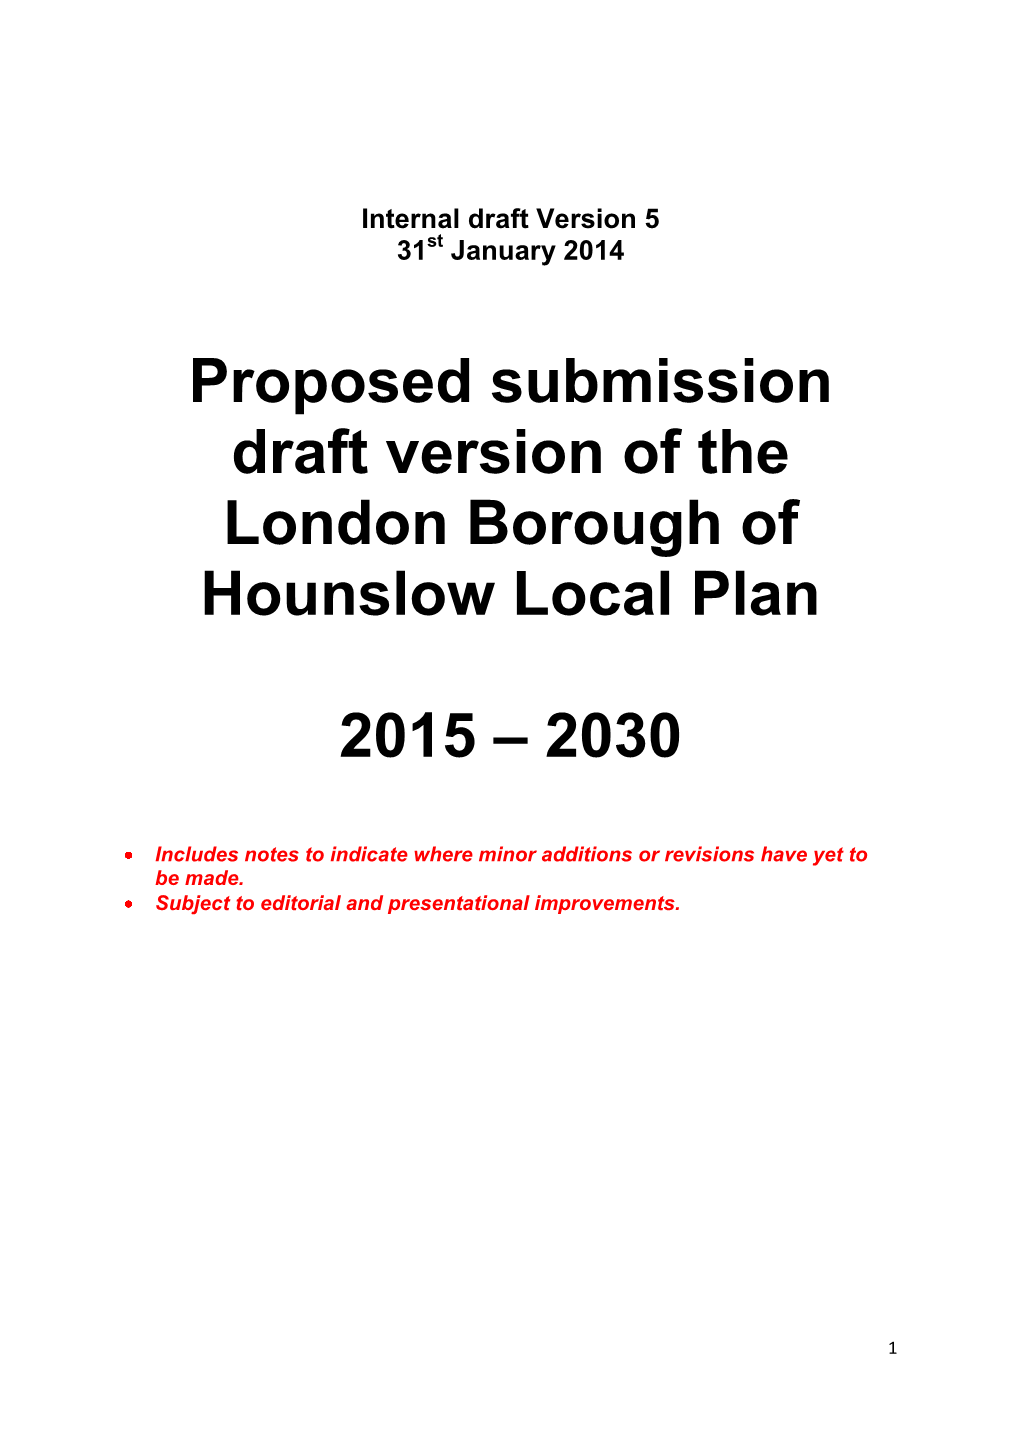 Proposed Submission Draft Version of the London Borough of Hounslow Local Plan